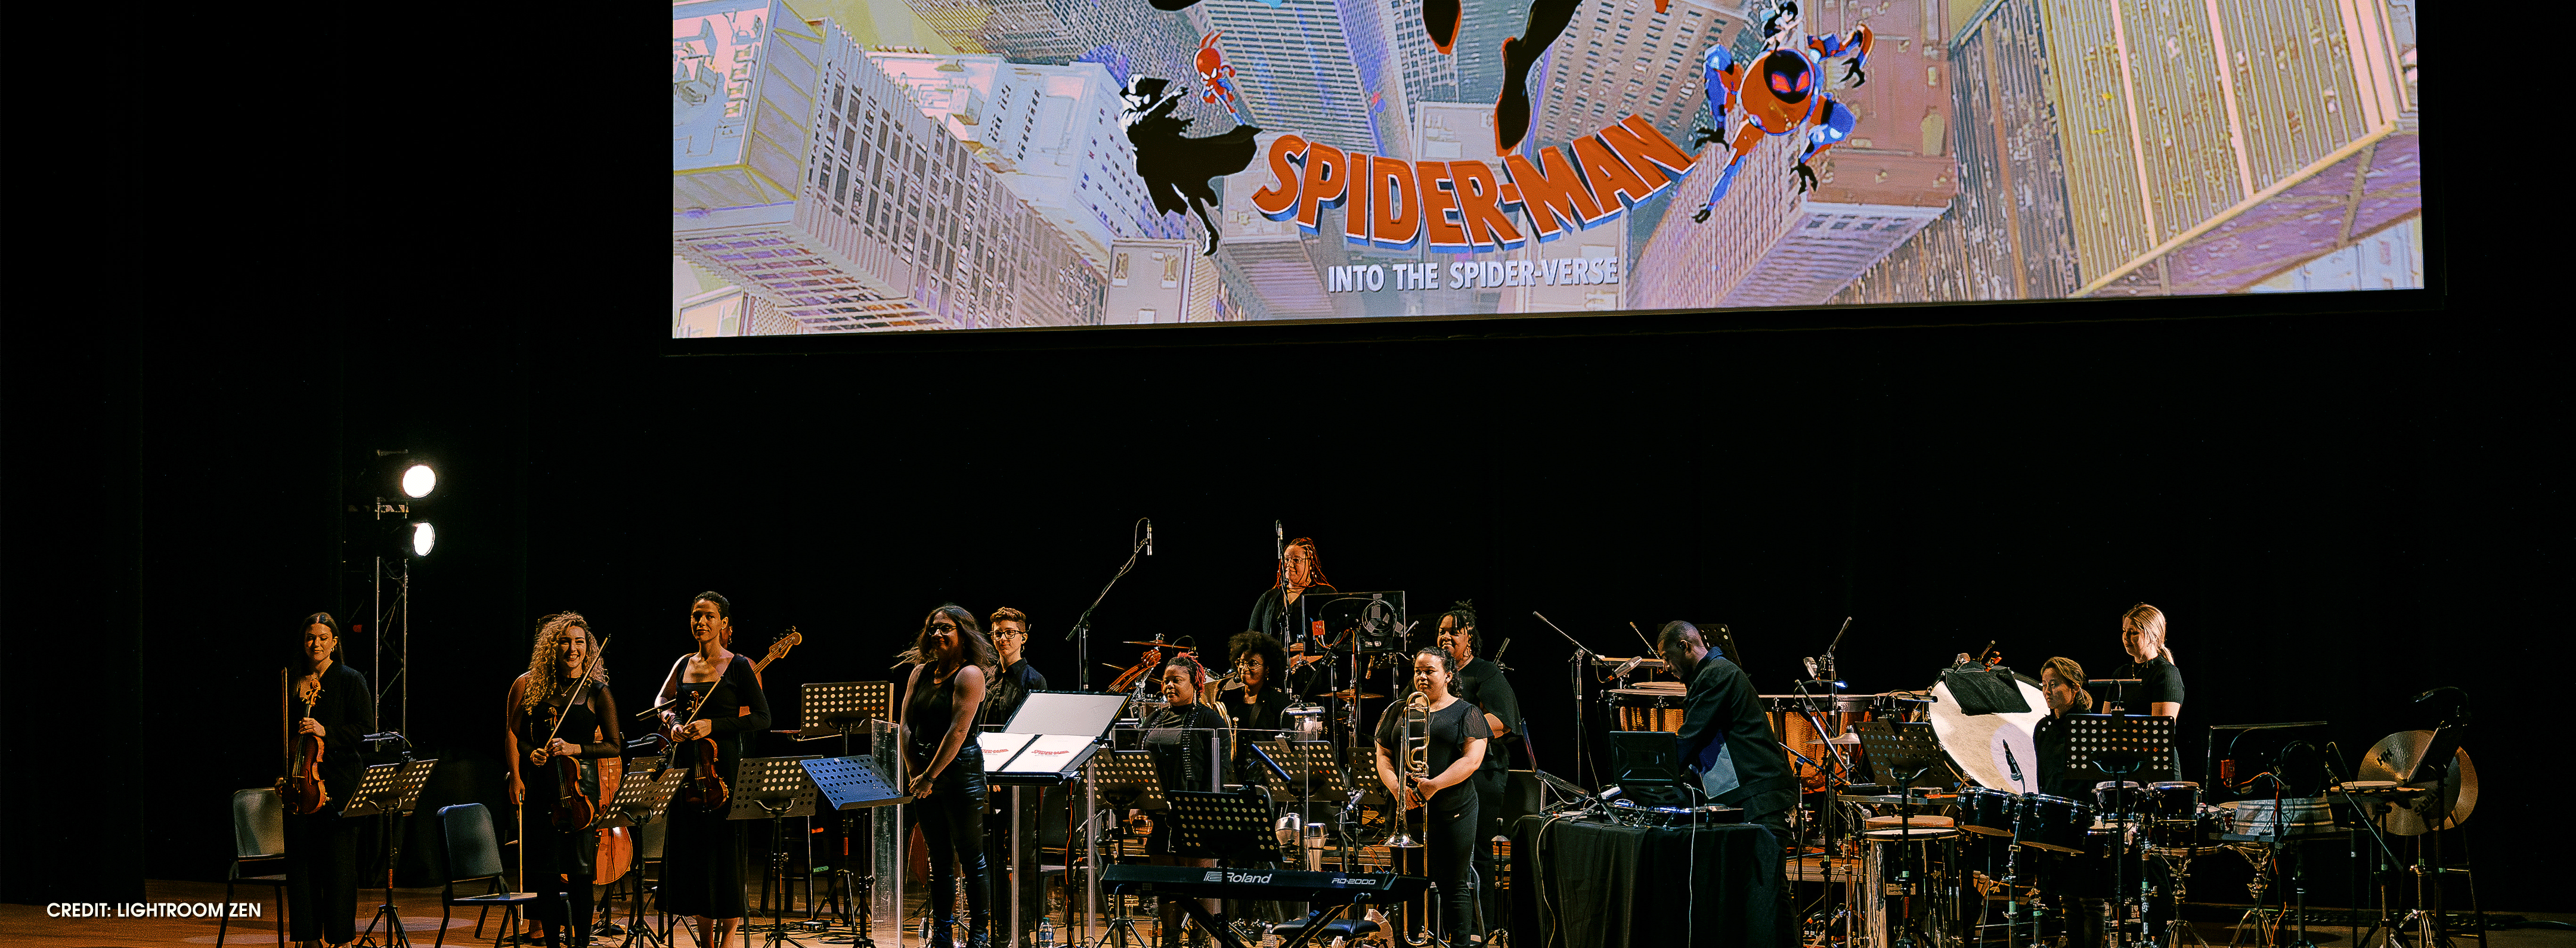 Spider-Man: Into the Spider-verse Live Concert Set for March